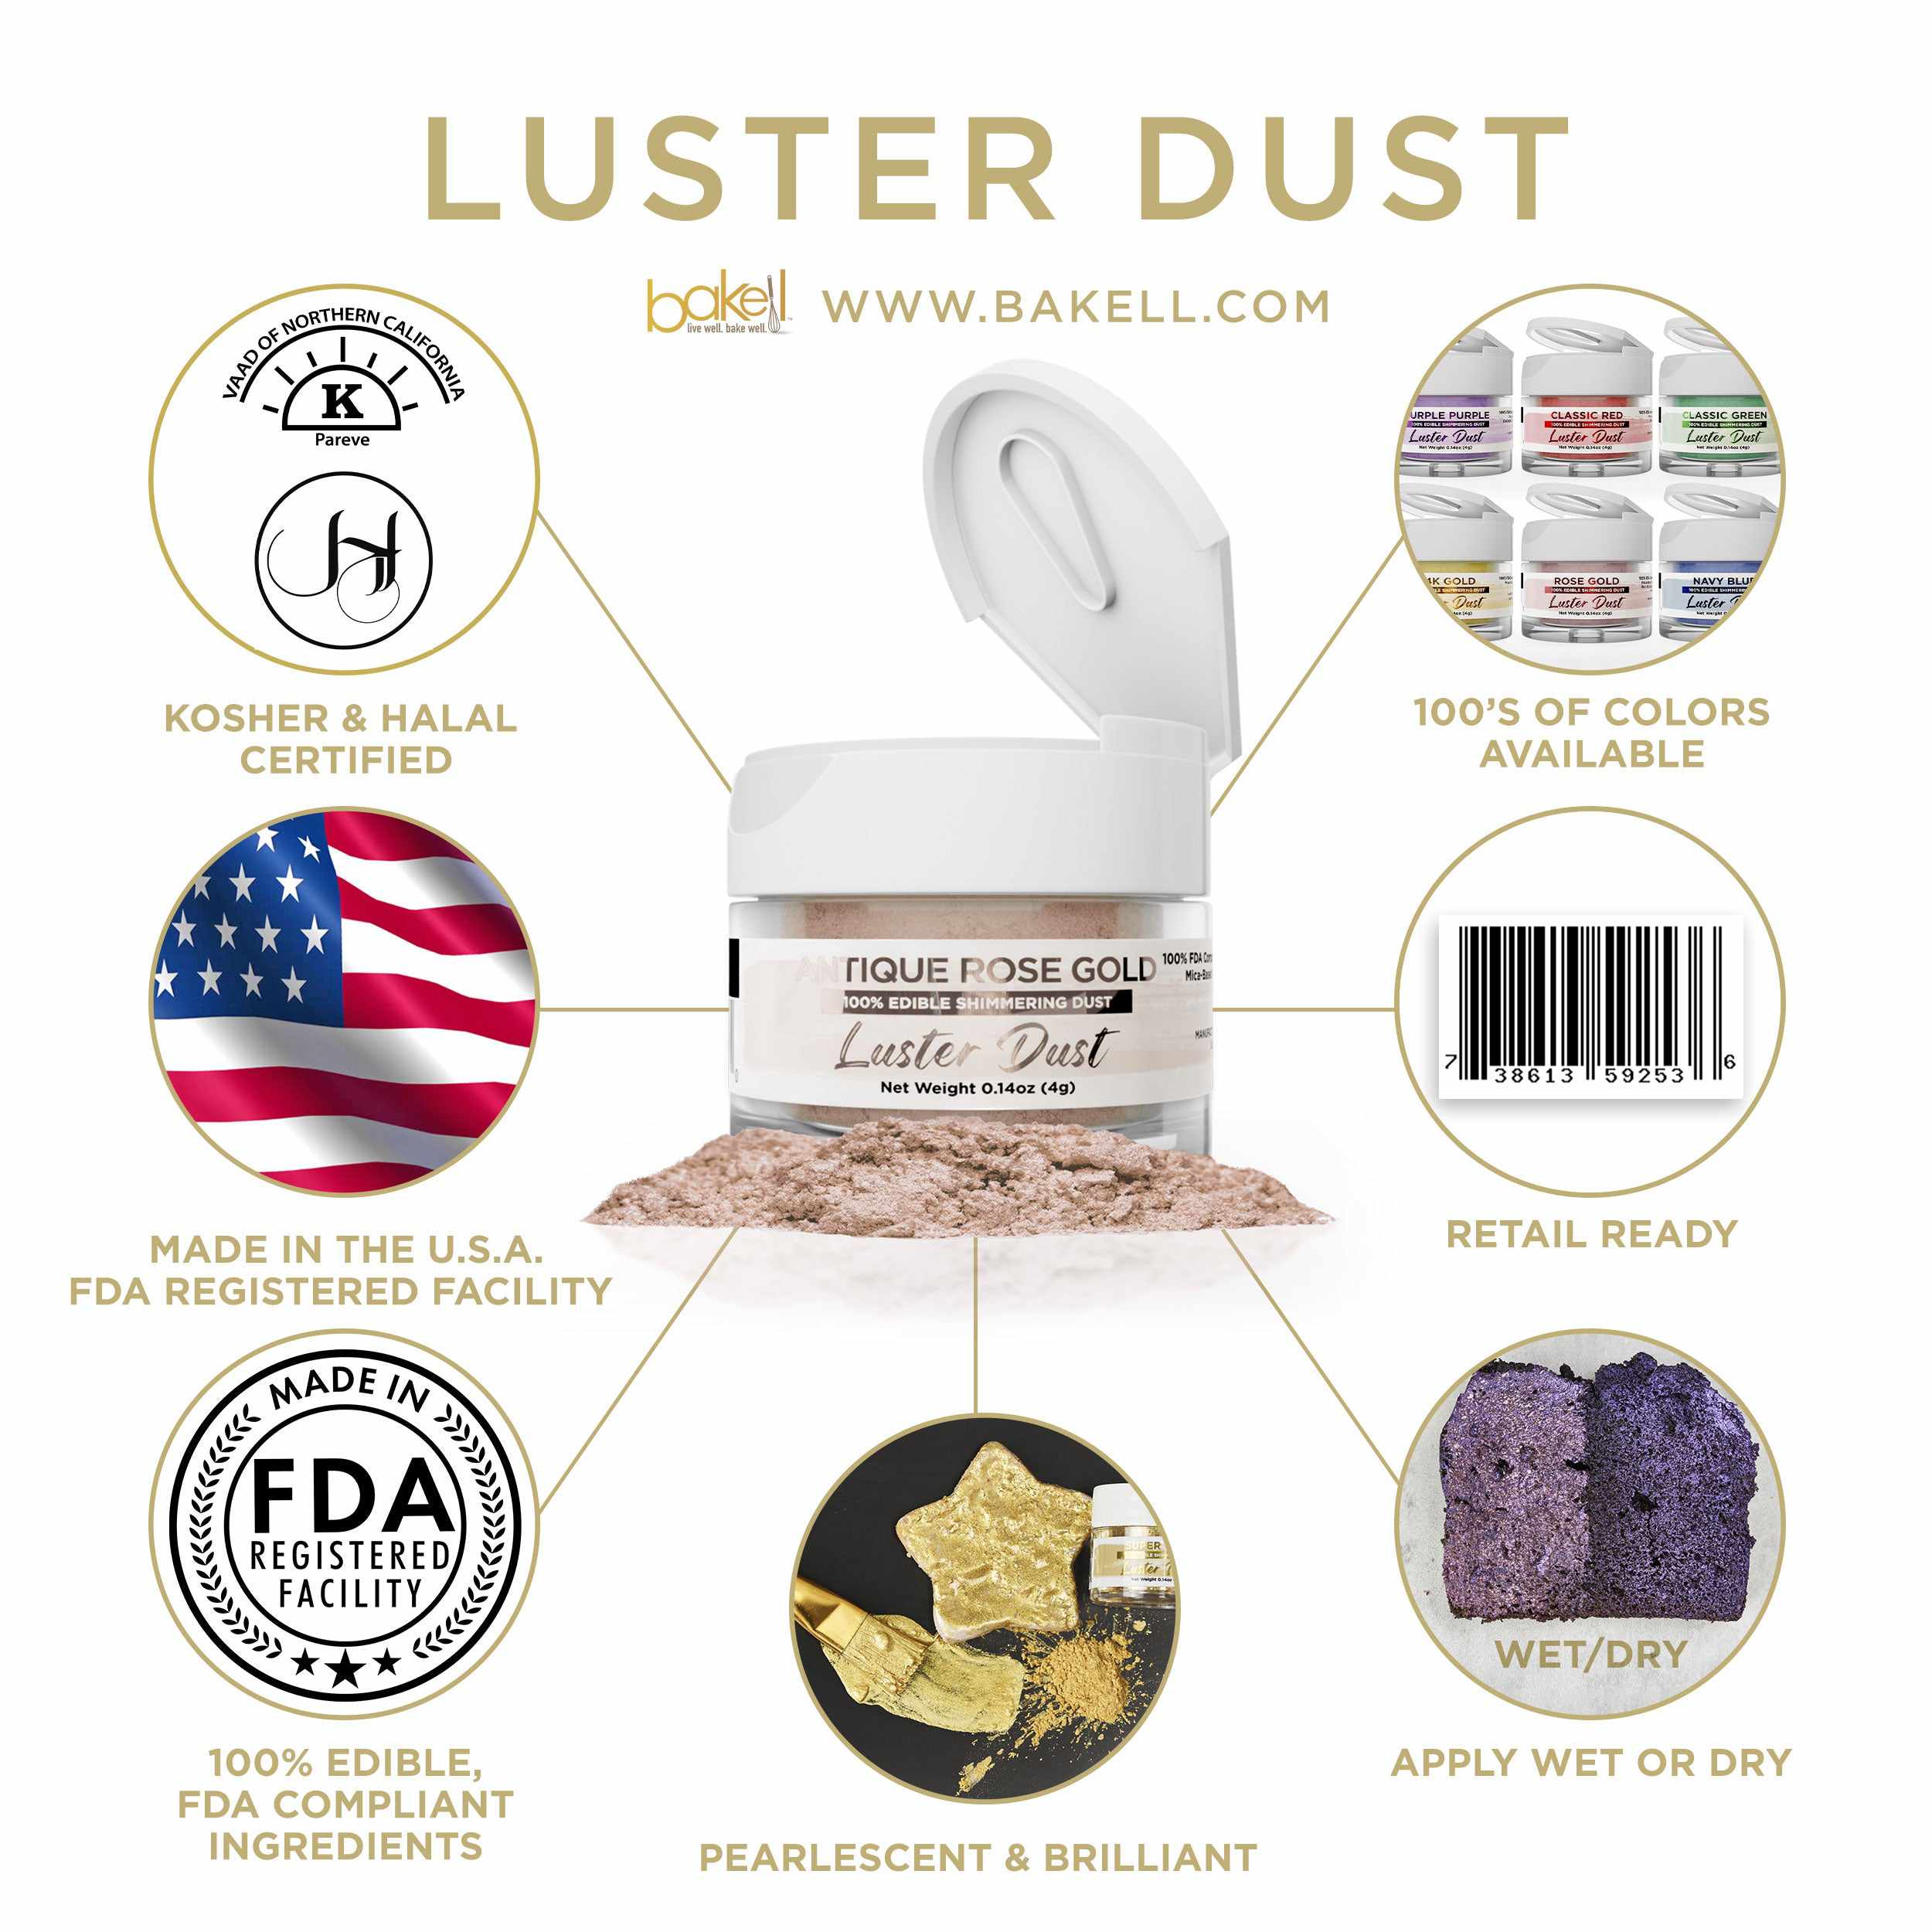 Infographic for Luster Dust in Antique Rose Gold, 5 grams | bakell.com